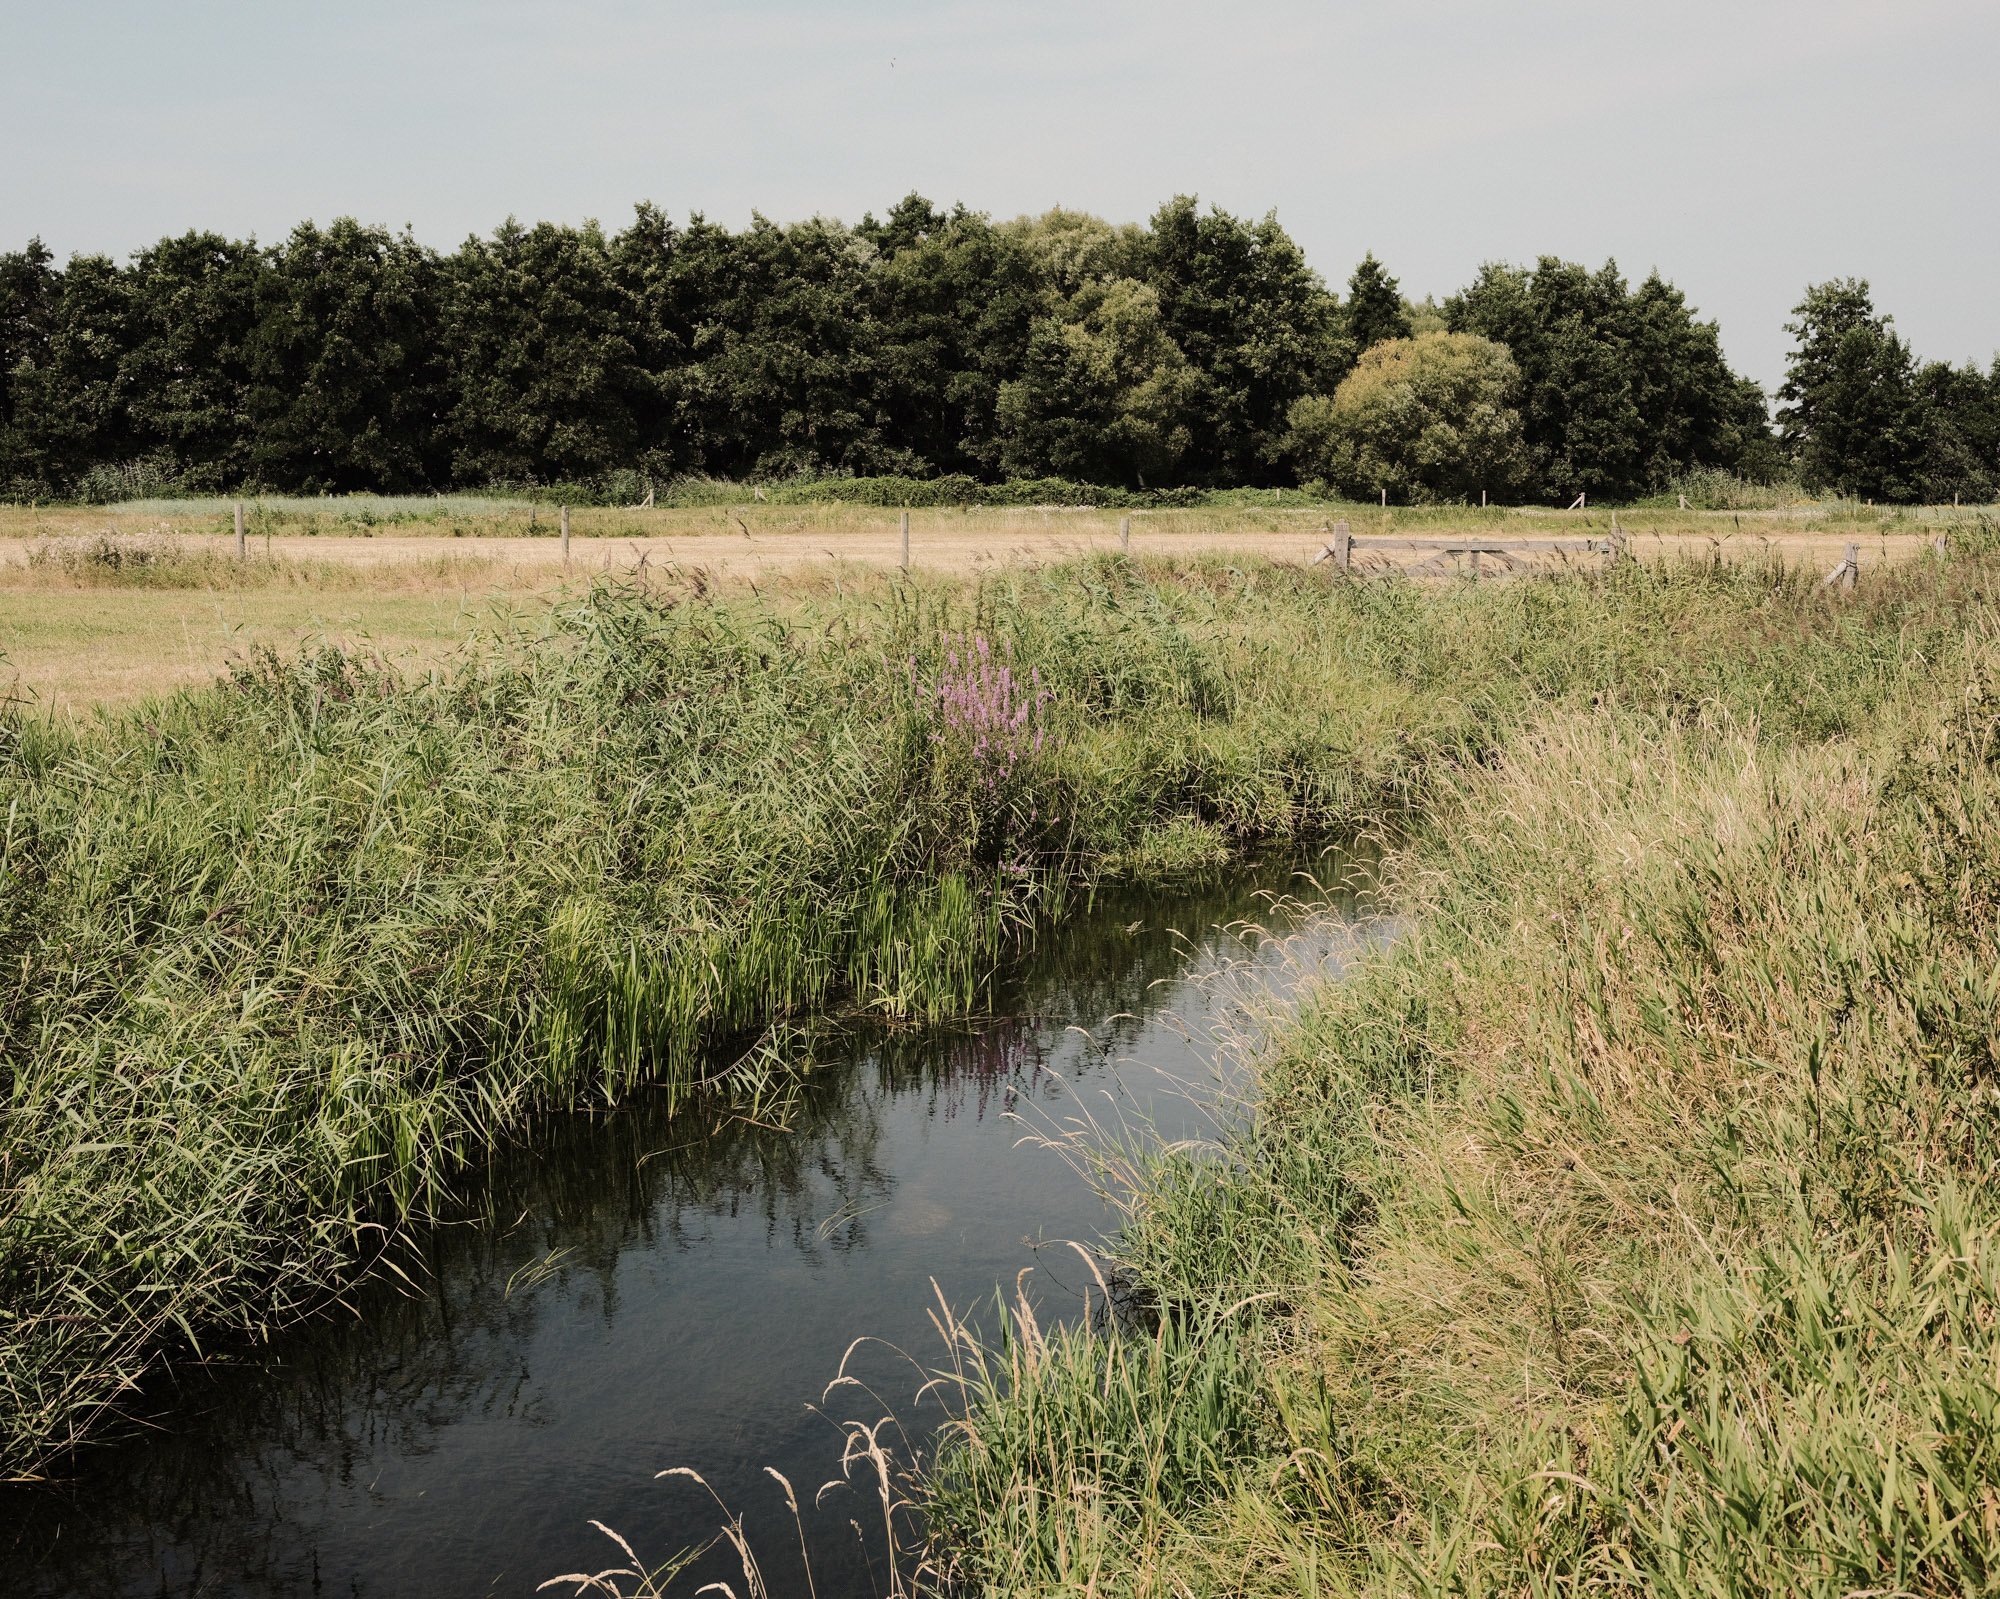  This stream was used by red deers to cross from one nature reserve to another. By doing so, rejuvinating an original plan of connecting two territories for animals, although this plan was later cancelled. The story of this deers crossing was controv